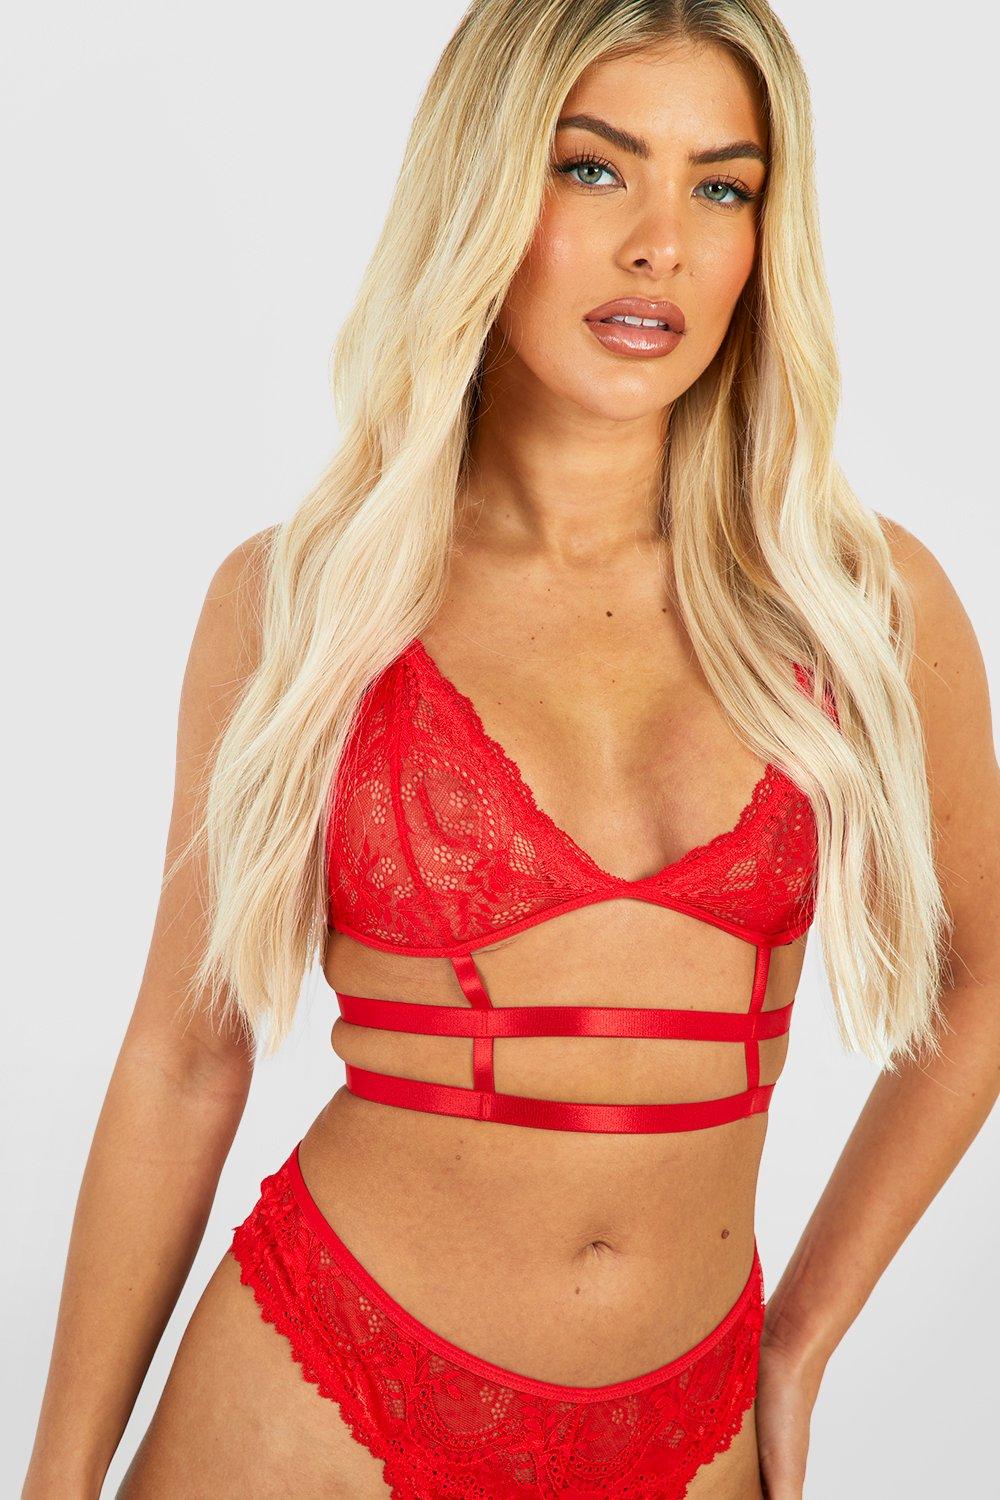 https://media.boohoo.com/i/boohoo/lzz88193_red_xl_2/female-red-lace-harness-bralette-&-brief-set